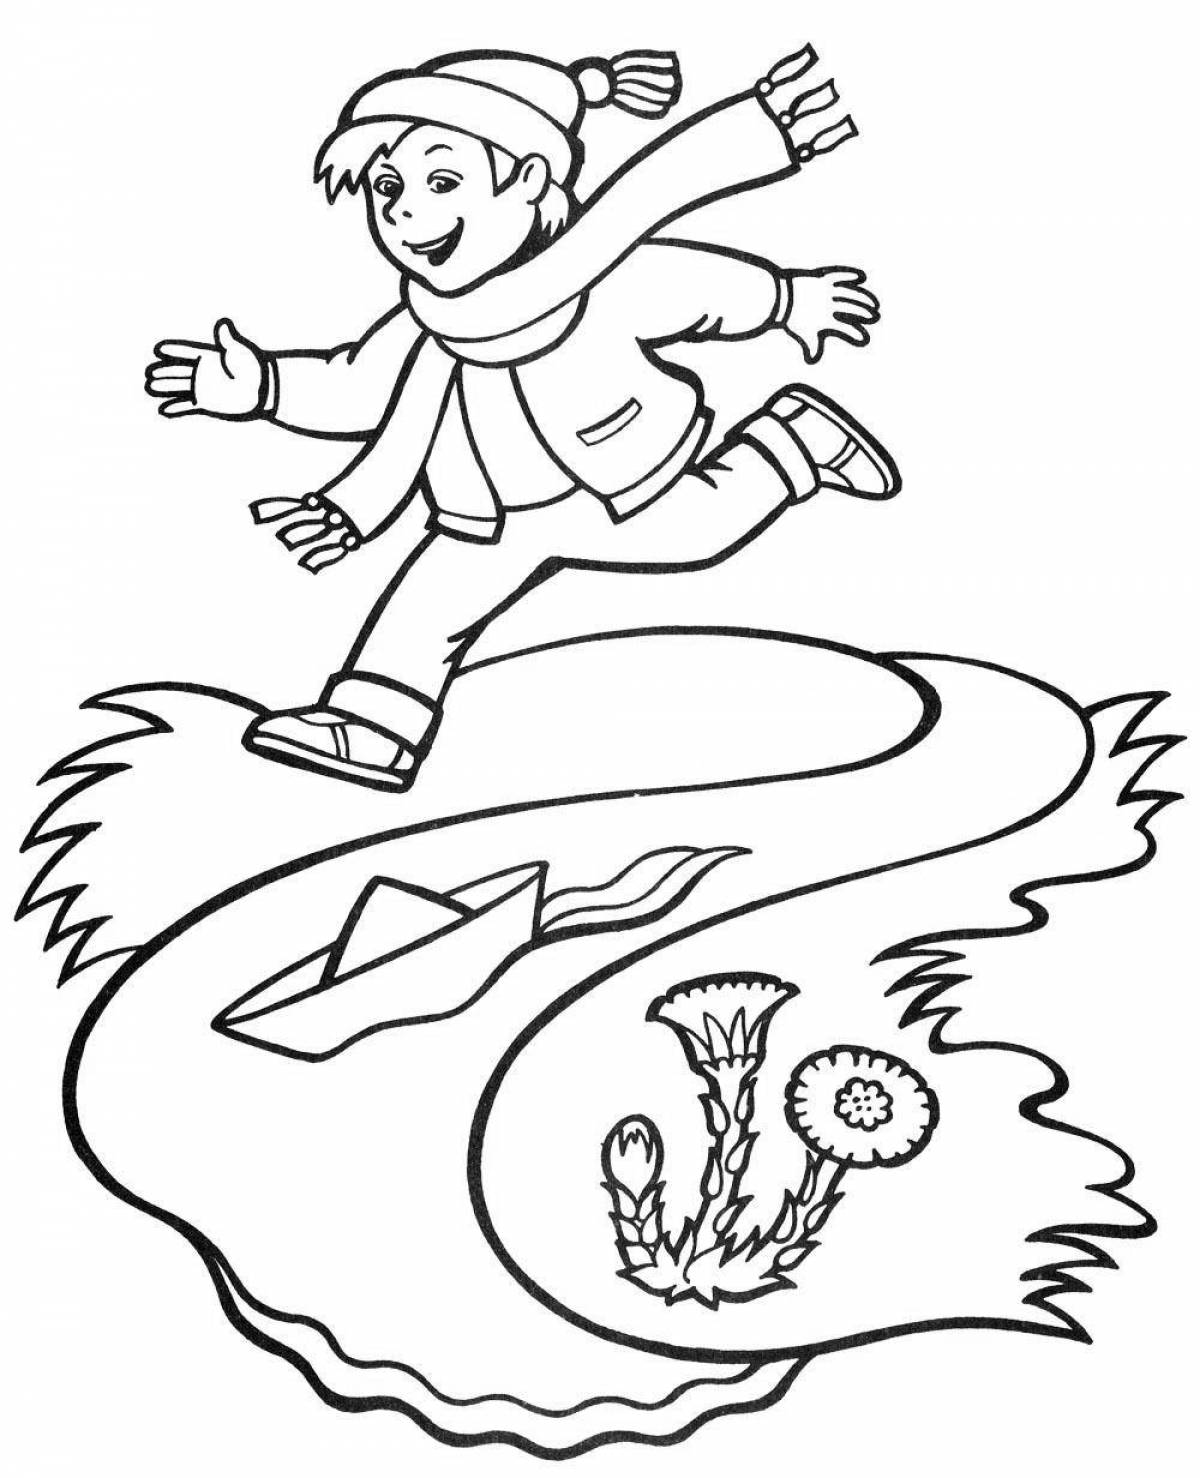 Glorious Brook coloring page